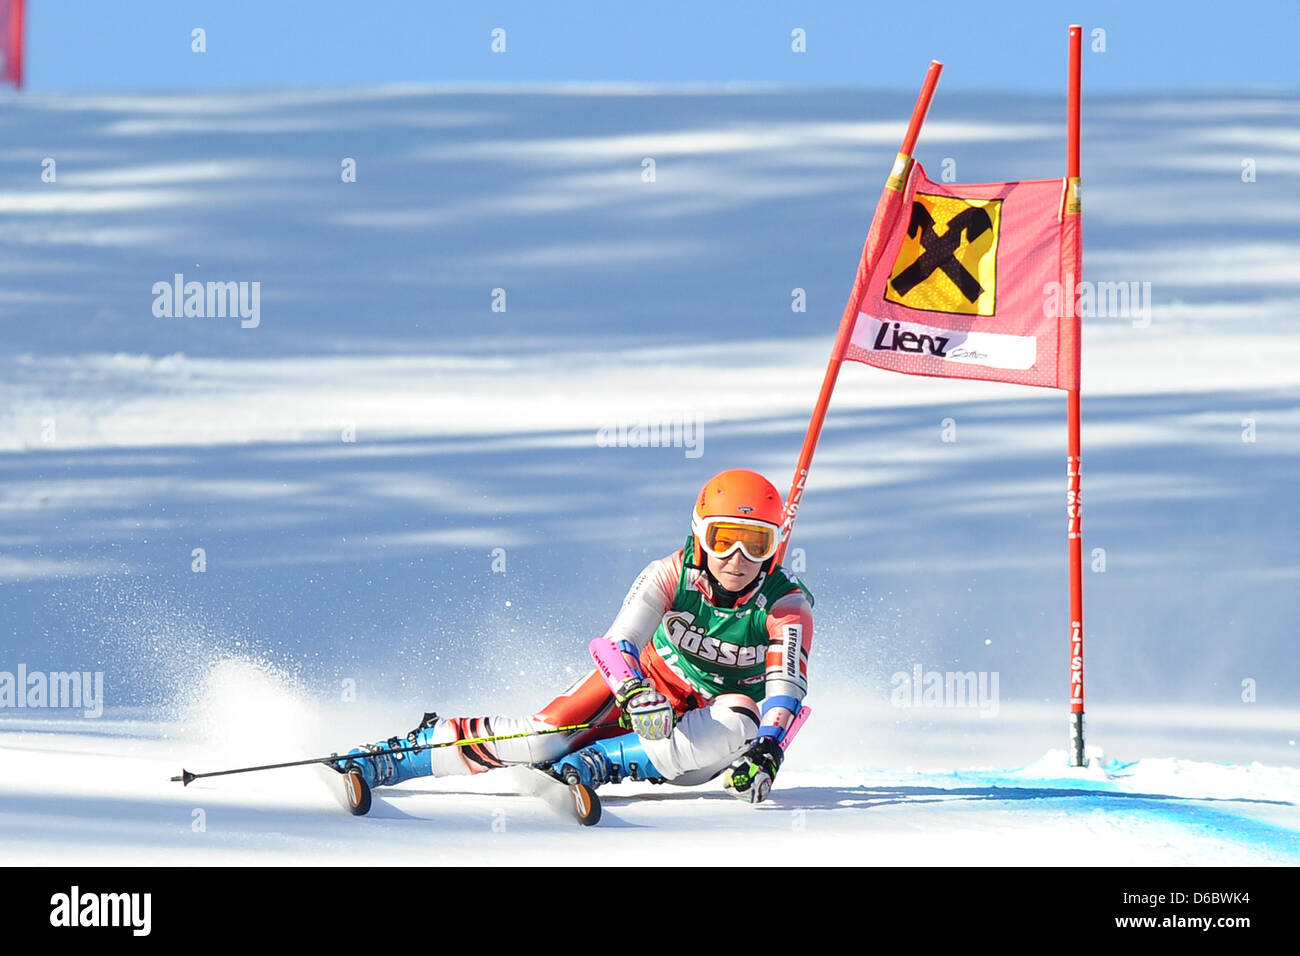 Polish skier Maryna Gasienica Daniel competes in the women's giant slalom of the FIS Ski World Cup Lienz 2011 at the world cup course Hochstein in Lienz, Austria, 28 December 2011. Photo: Revierfoto Stock Photo